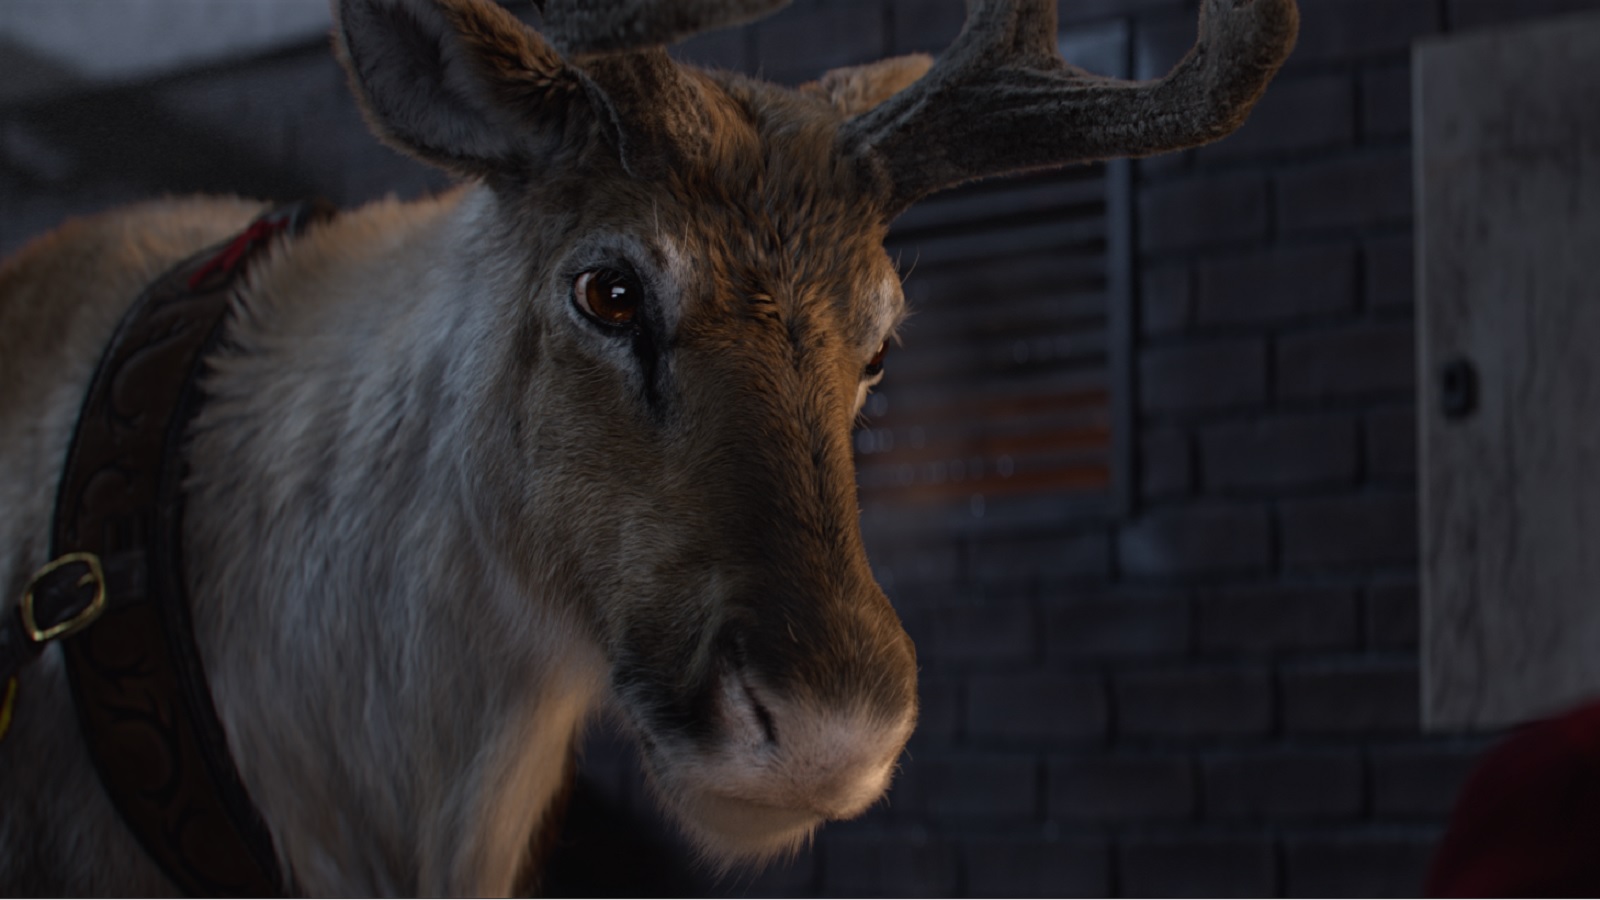 McDonald’s Saves Santa’s Reindeer with Delicious Snacks